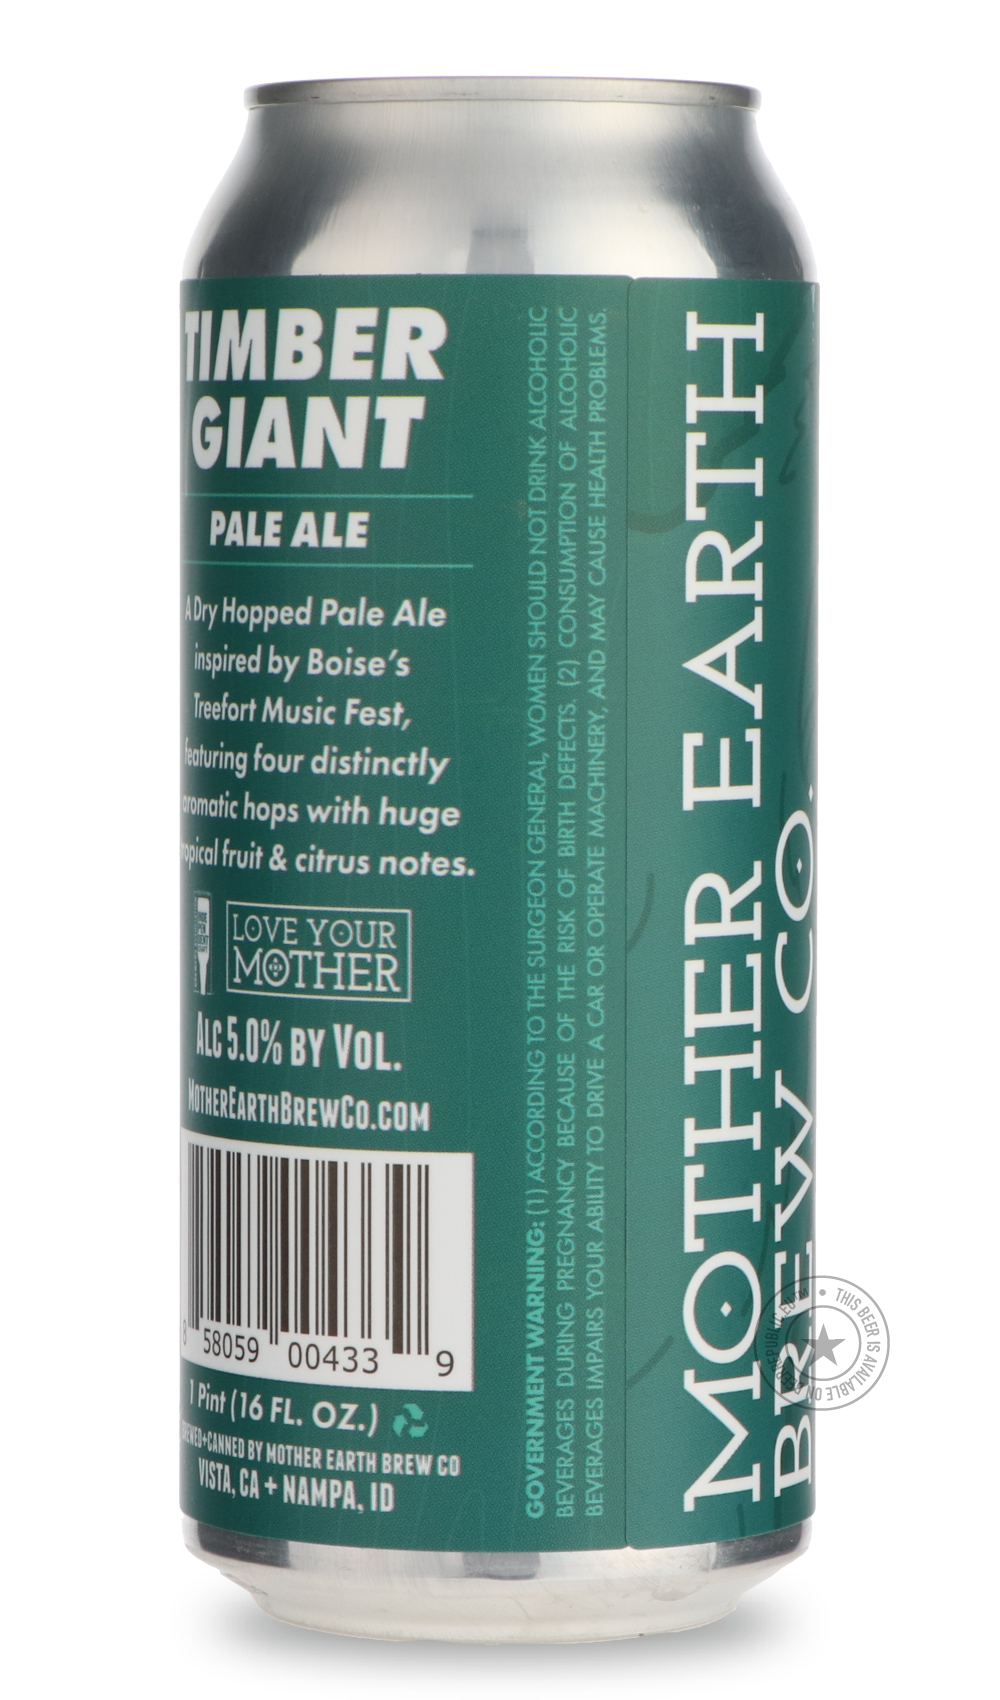 -Mother Earth- Timber Giant-Pale- Only @ Beer Republic - The best online beer store for American & Canadian craft beer - Buy beer online from the USA and Canada - Bier online kopen - Amerikaans bier kopen - Craft beer store - Craft beer kopen - Amerikanisch bier kaufen - Bier online kaufen - Acheter biere online - IPA - Stout - Porter - New England IPA - Hazy IPA - Imperial Stout - Barrel Aged - Barrel Aged Imperial Stout - Brown - Dark beer - Blond - Blonde - Pilsner - Lager - Wheat - Weizen - Amber - Barl